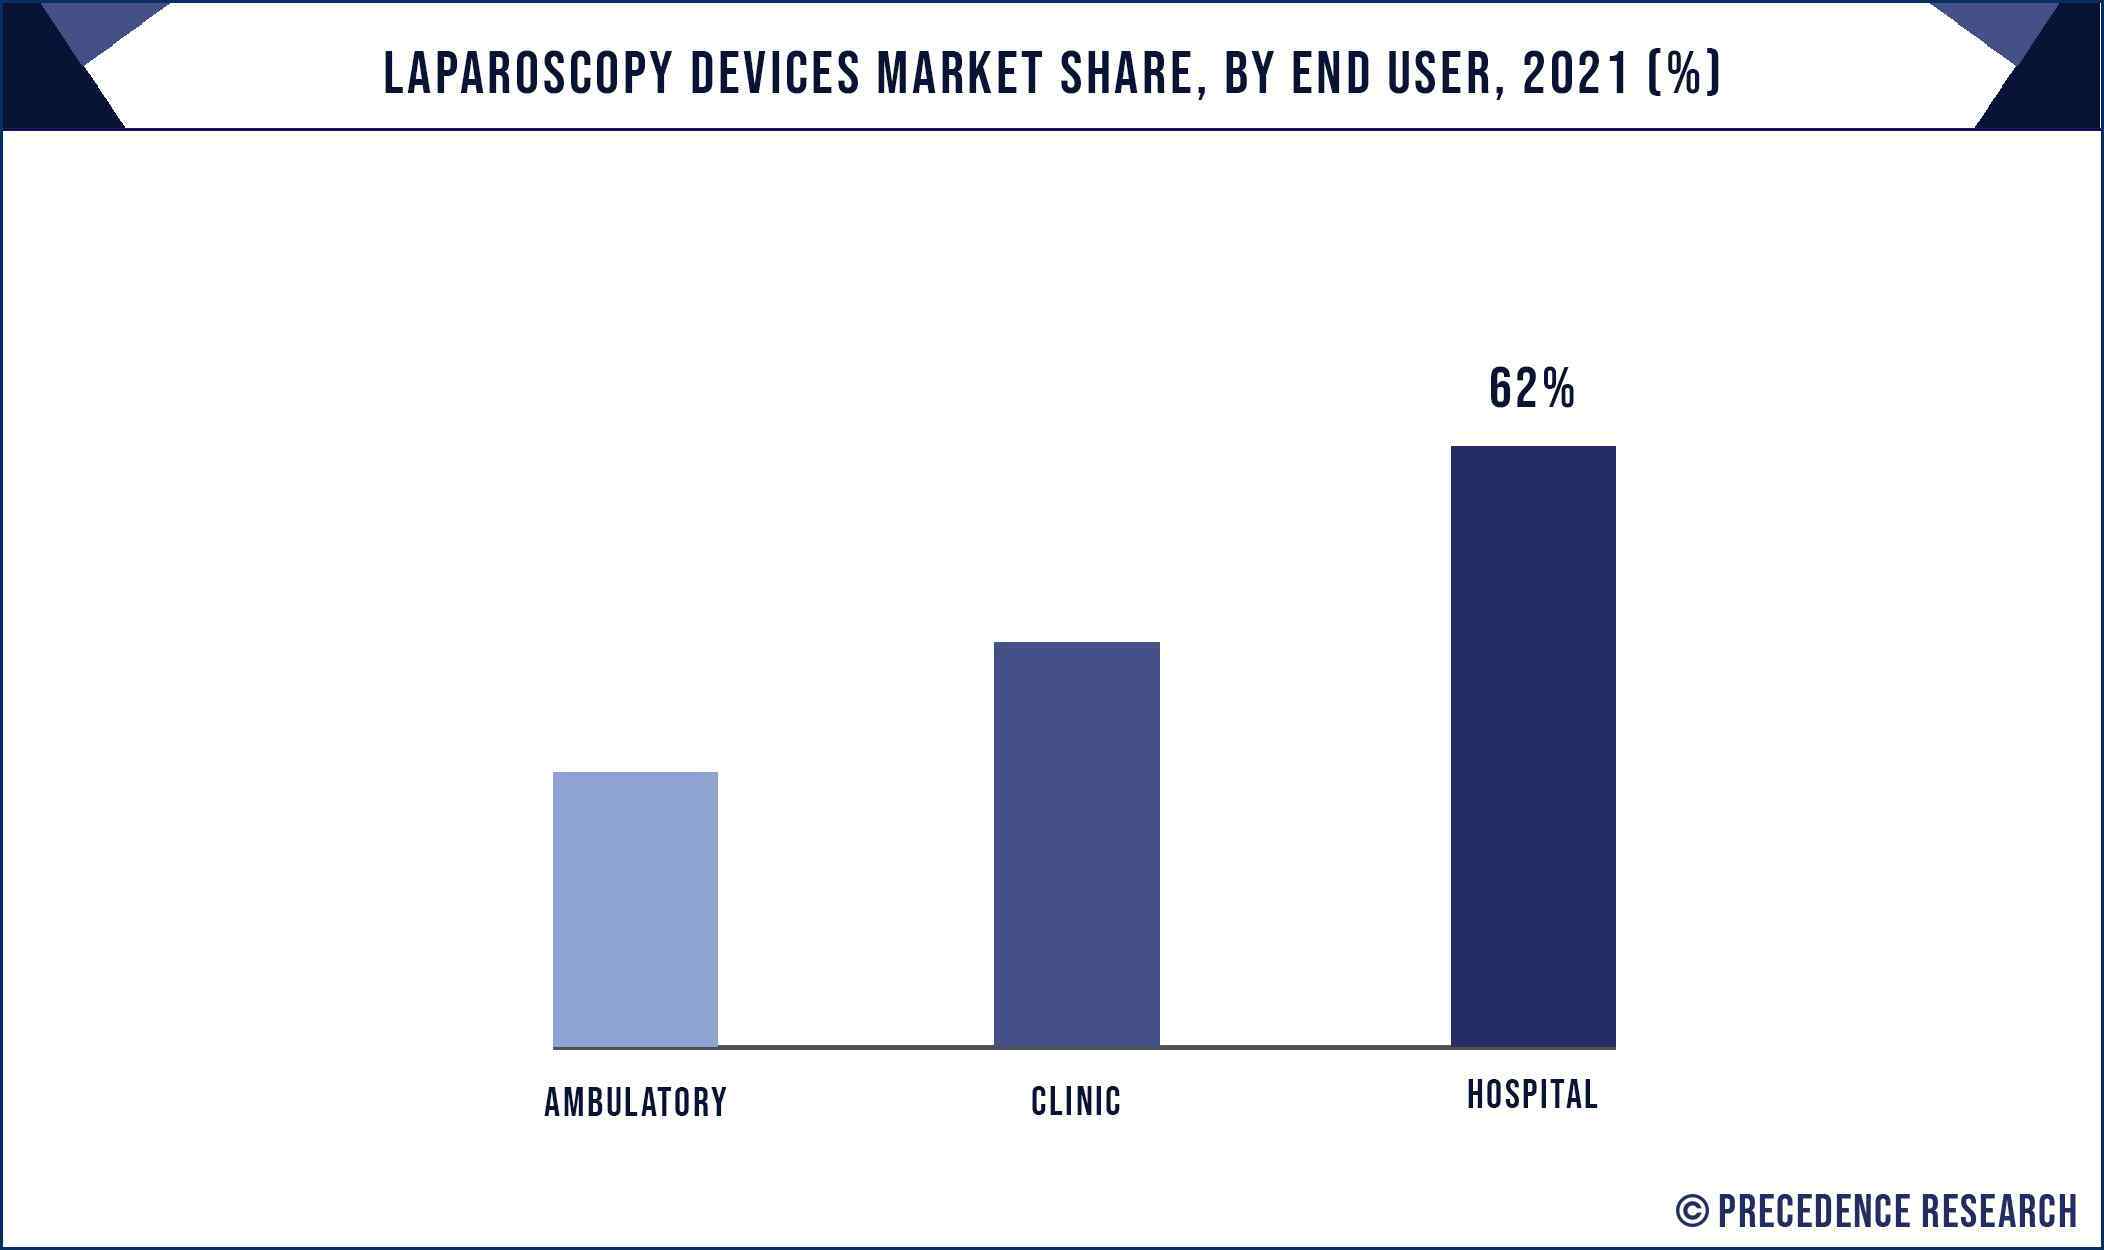 Laparoscopy Devices Market Share, By End User, 2021 (%)